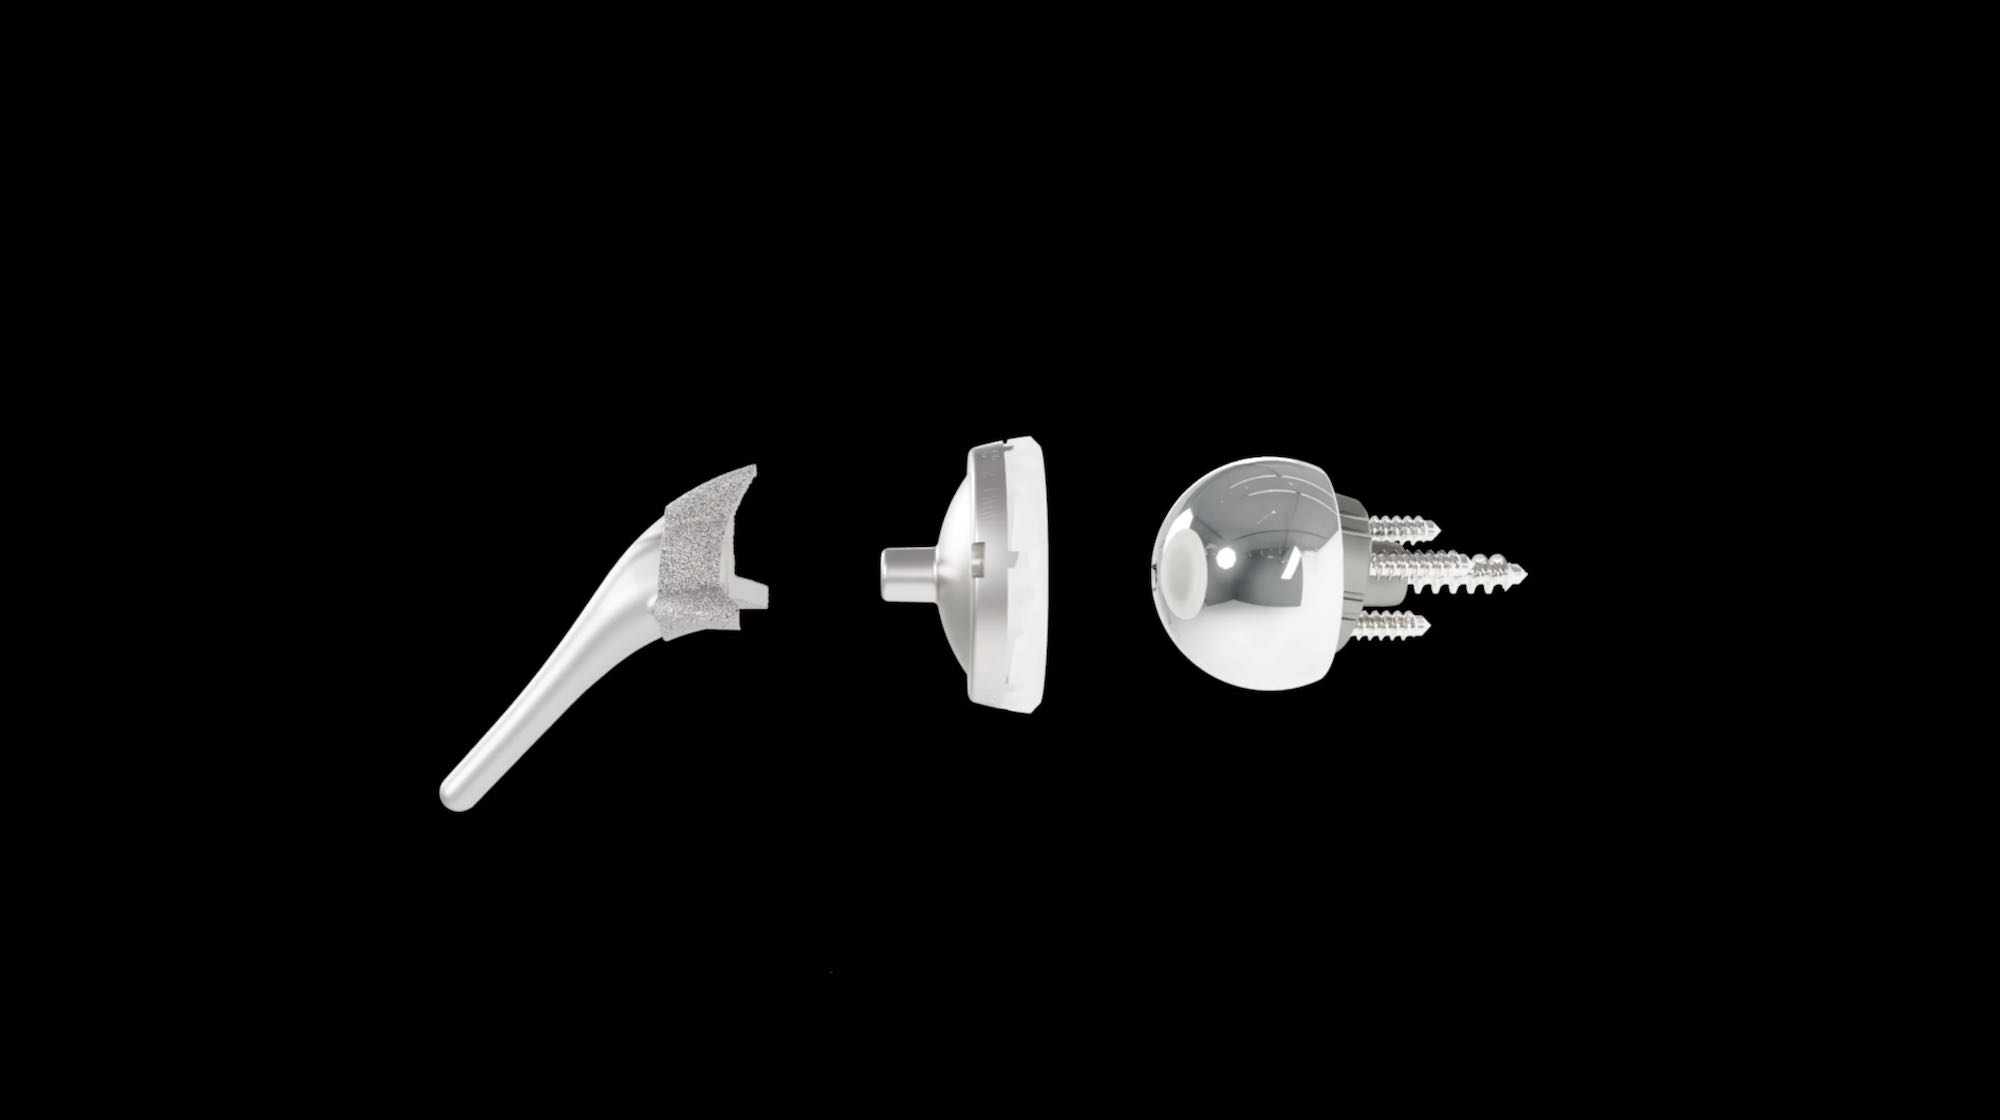 The components of the InSet™ reverse shoulder implant being put together in a video animation